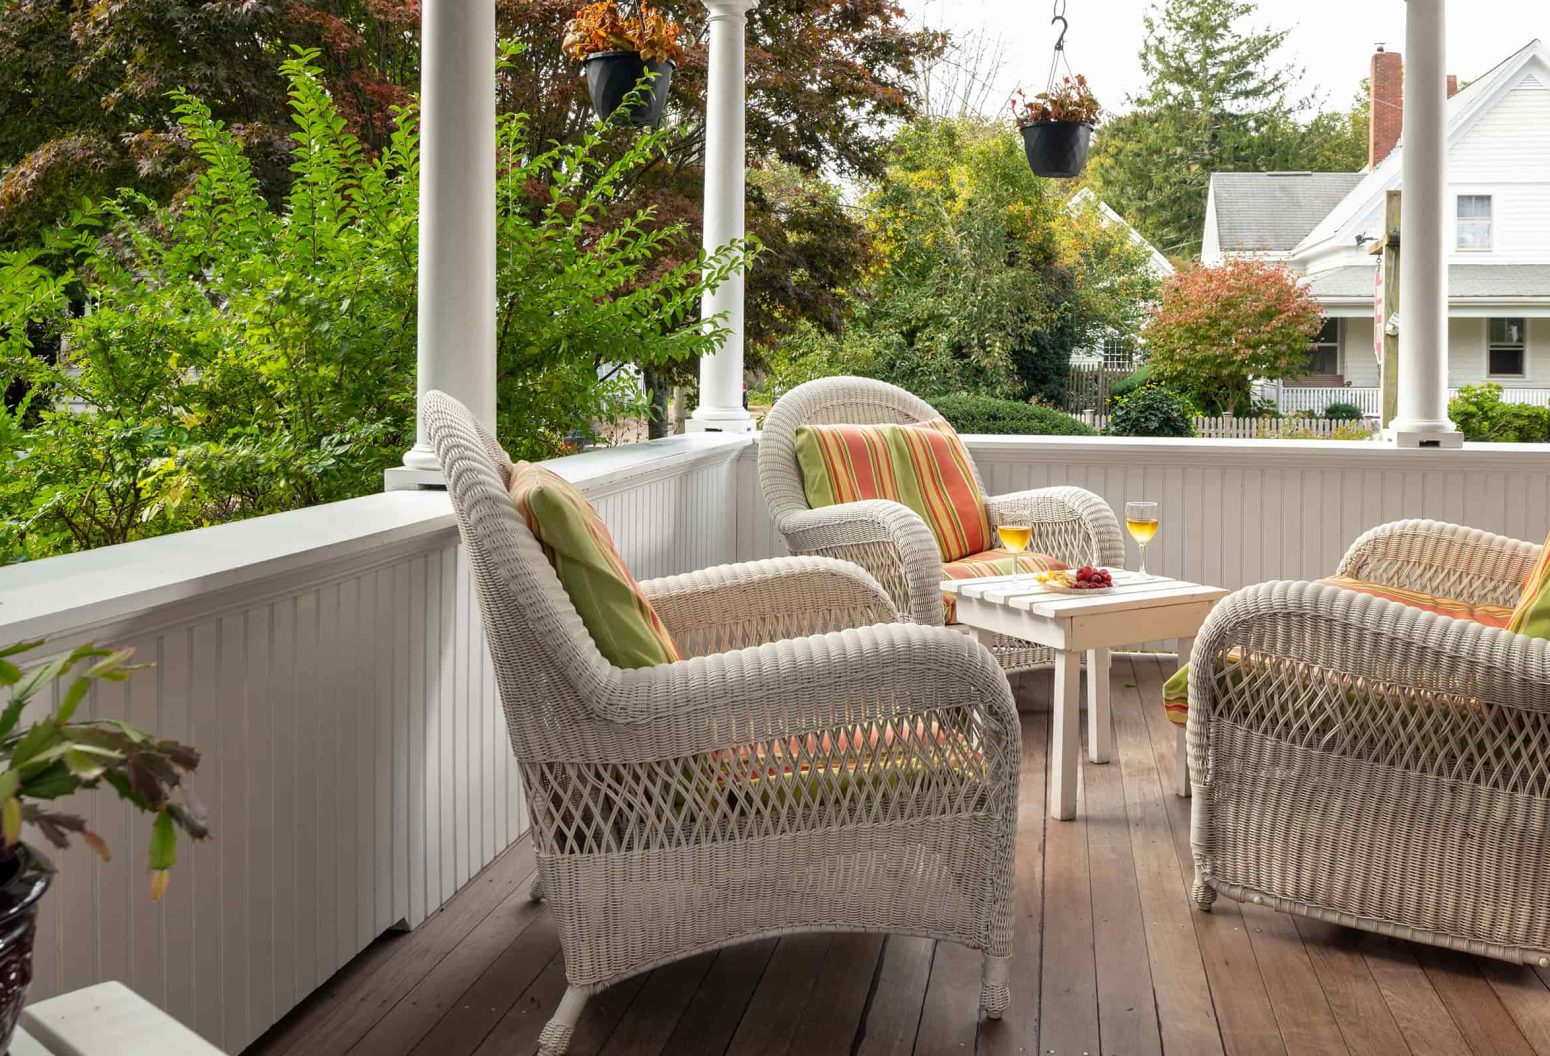 Wrap-around porch with wicker chairs